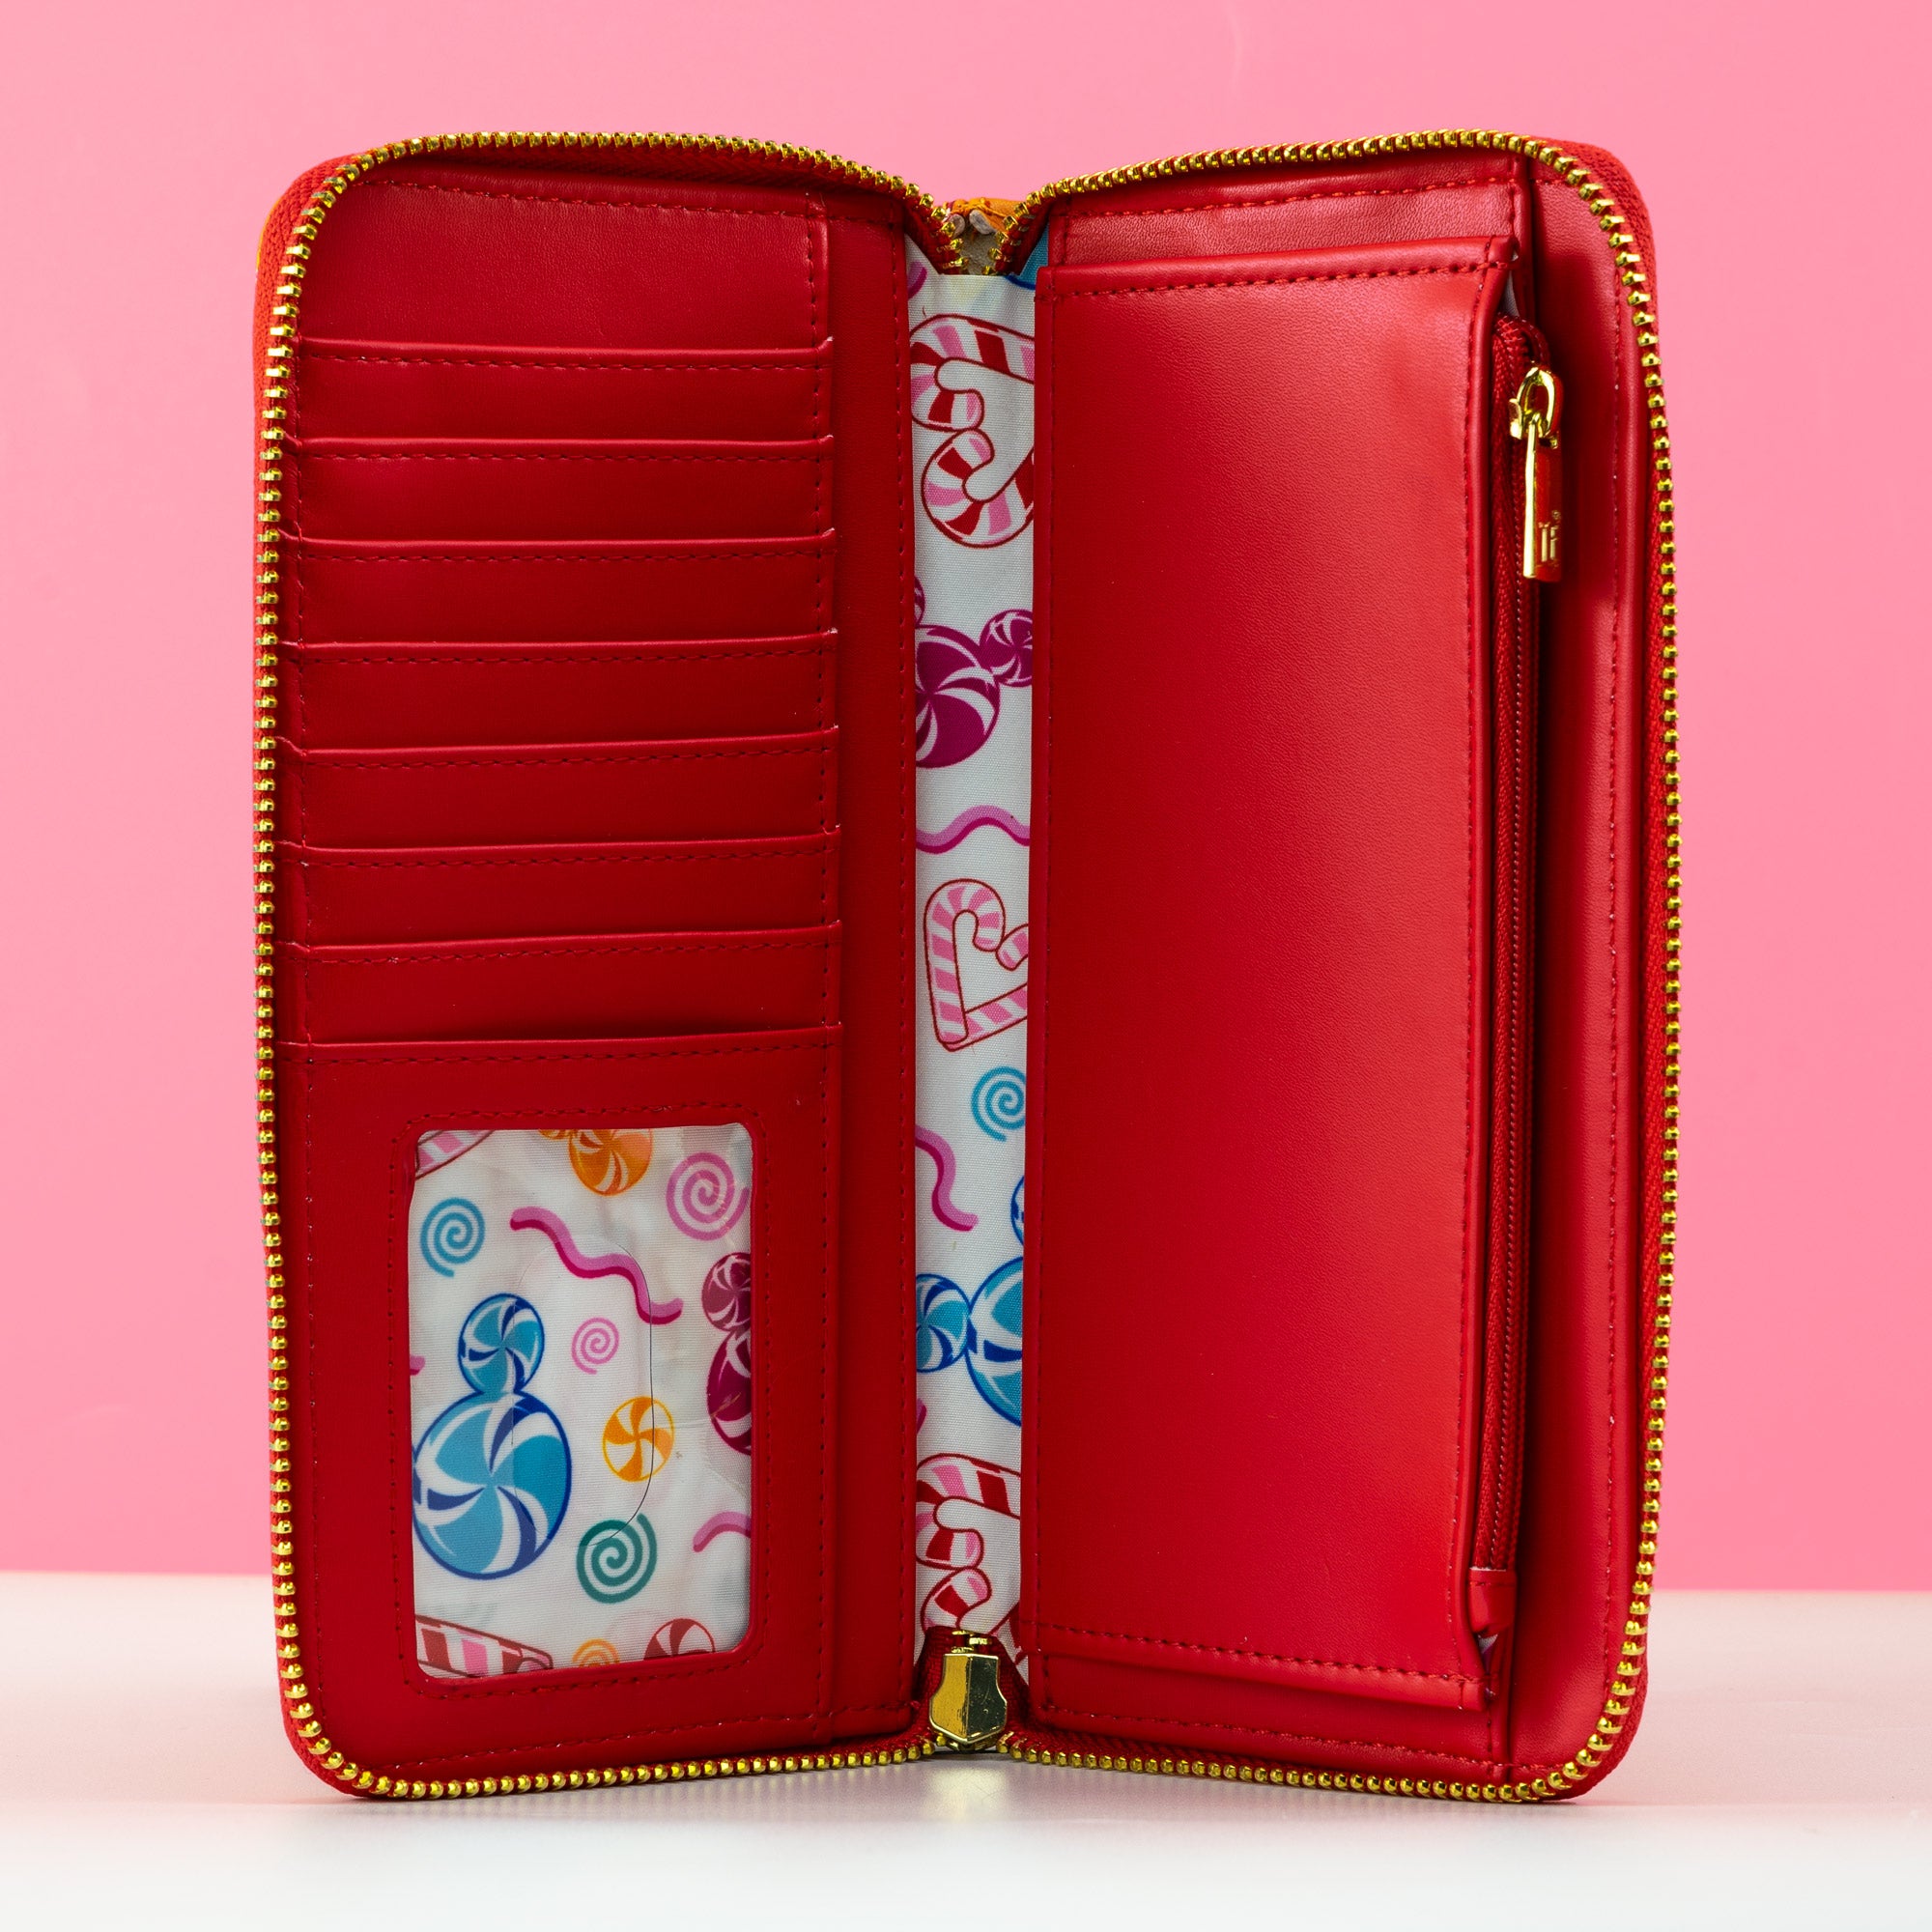 Loungefly x Disney Gingerbread All Over Print Purse